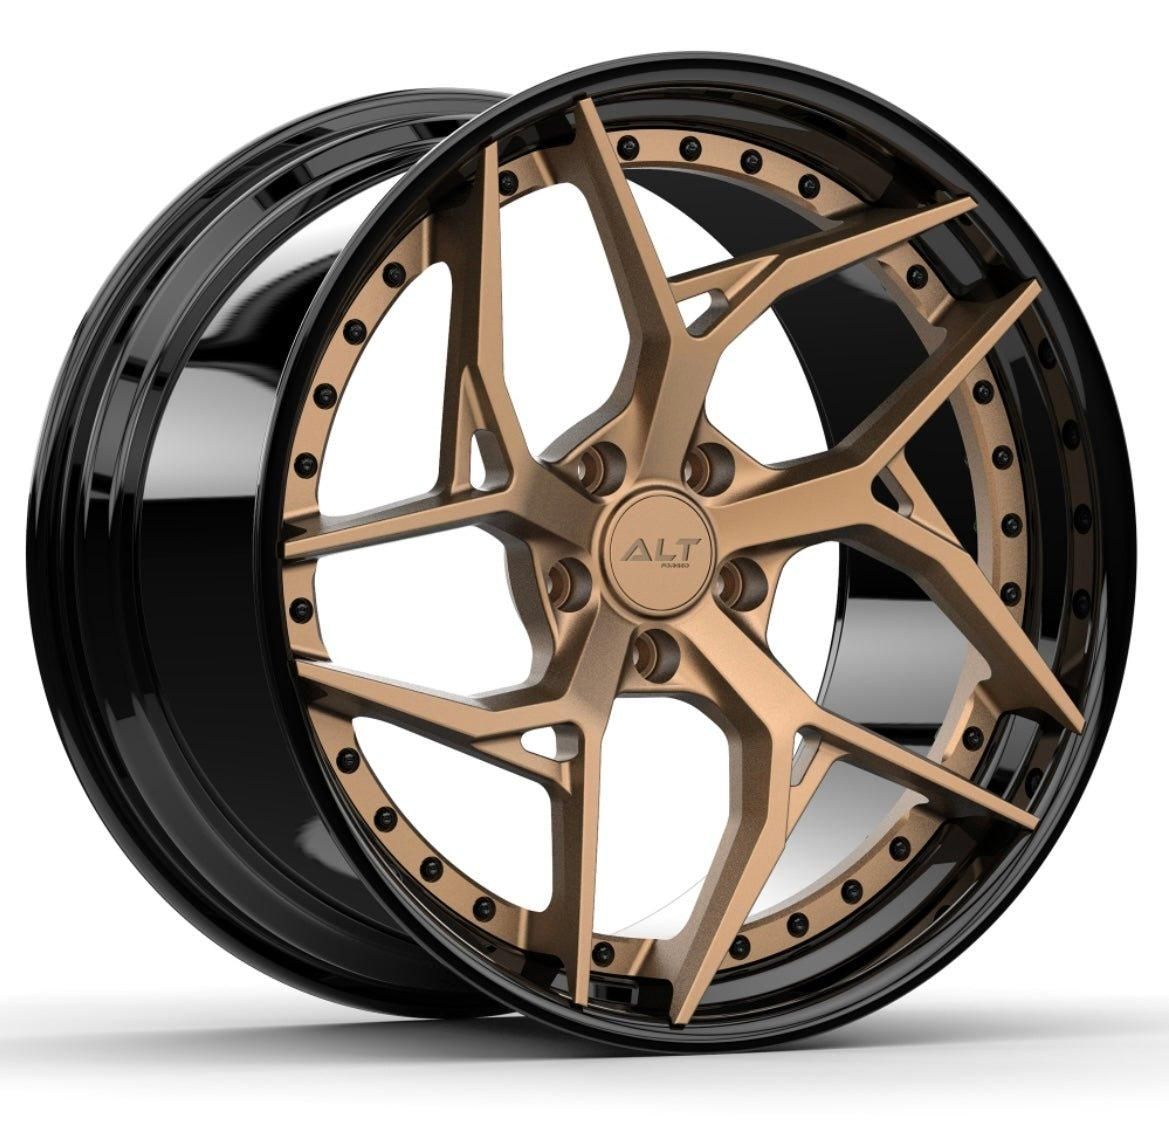 ALT DL12 Forged 2 Piece Satin Bronze with Gloss Black Lip wheels for C8 Corvette Z06 / E-Ray